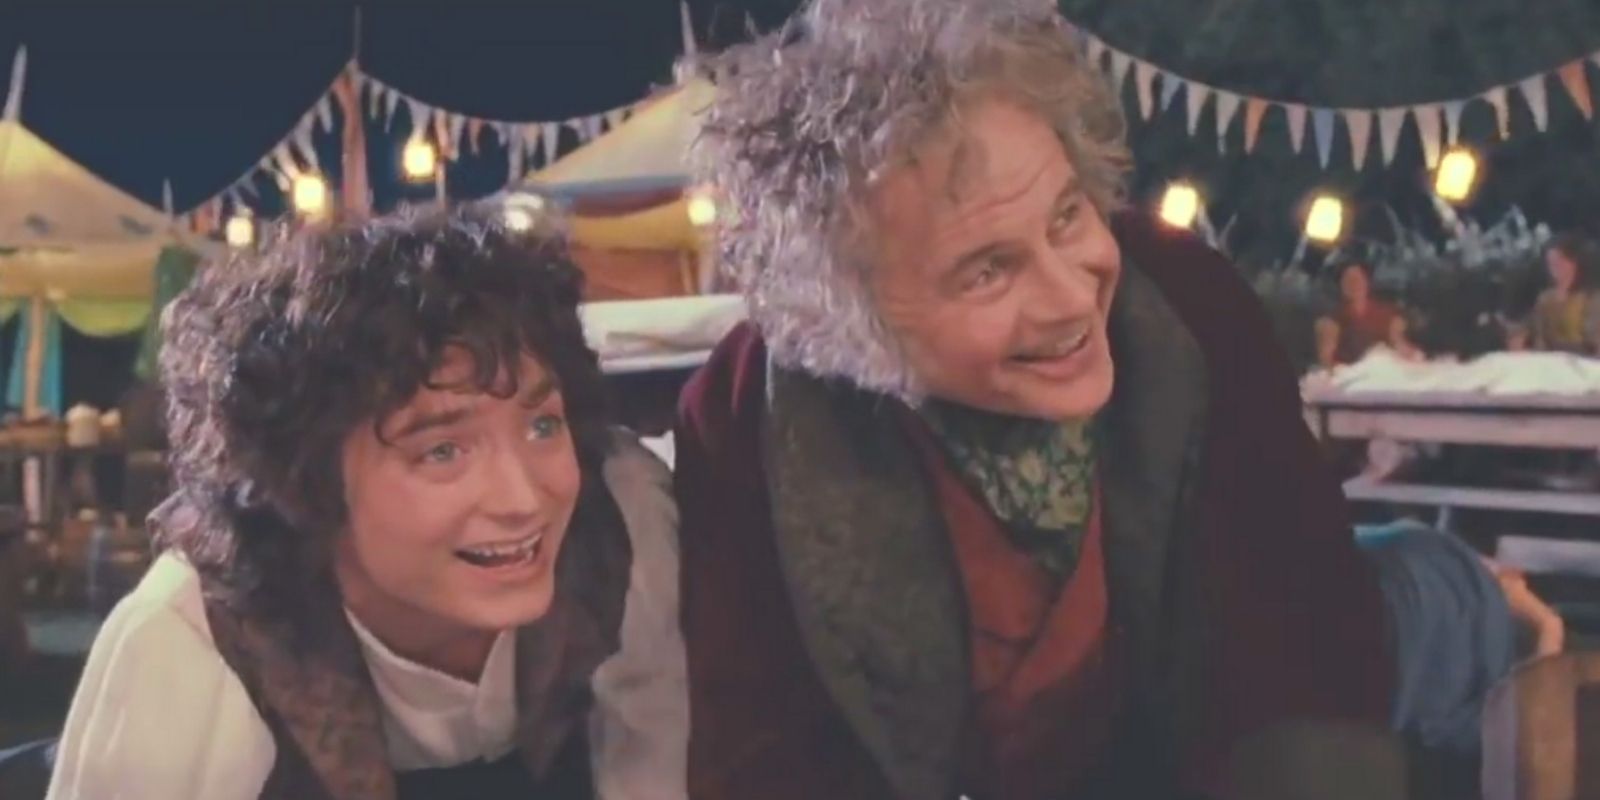 Frodo and Bilbo Baggins looking excitedly during Fellowship of the Ring's birthday party